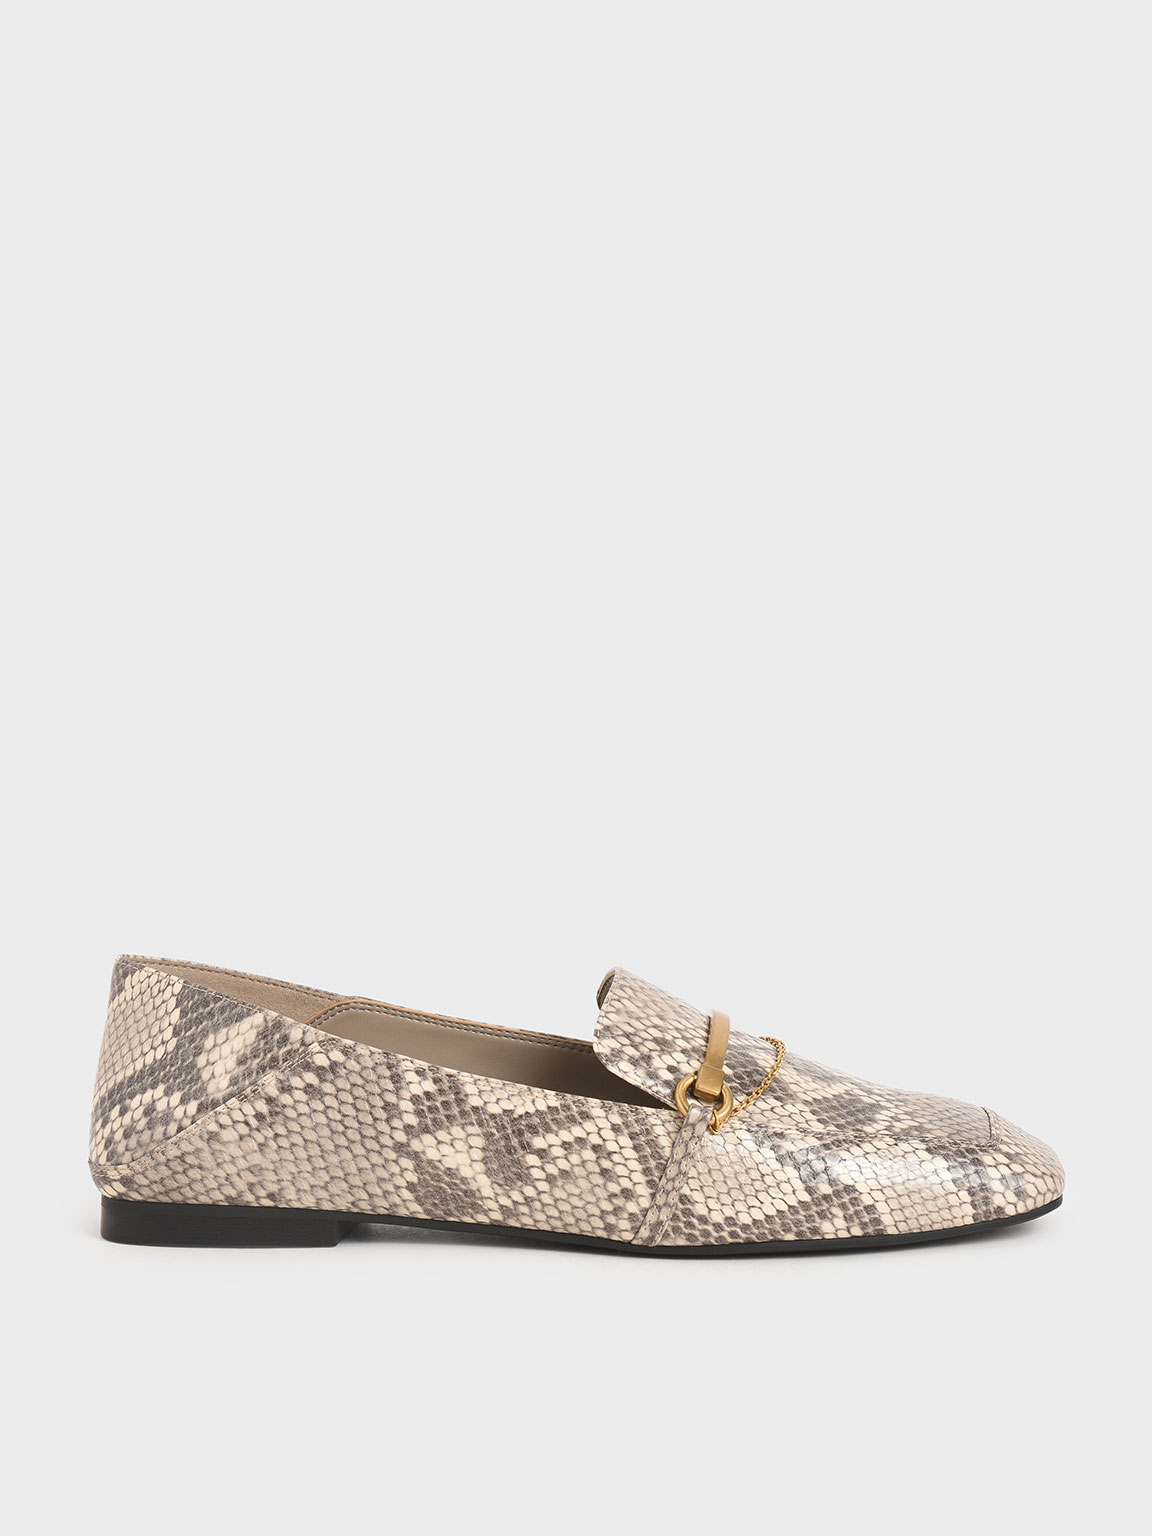 Snake Print Metallic Accent Loafers